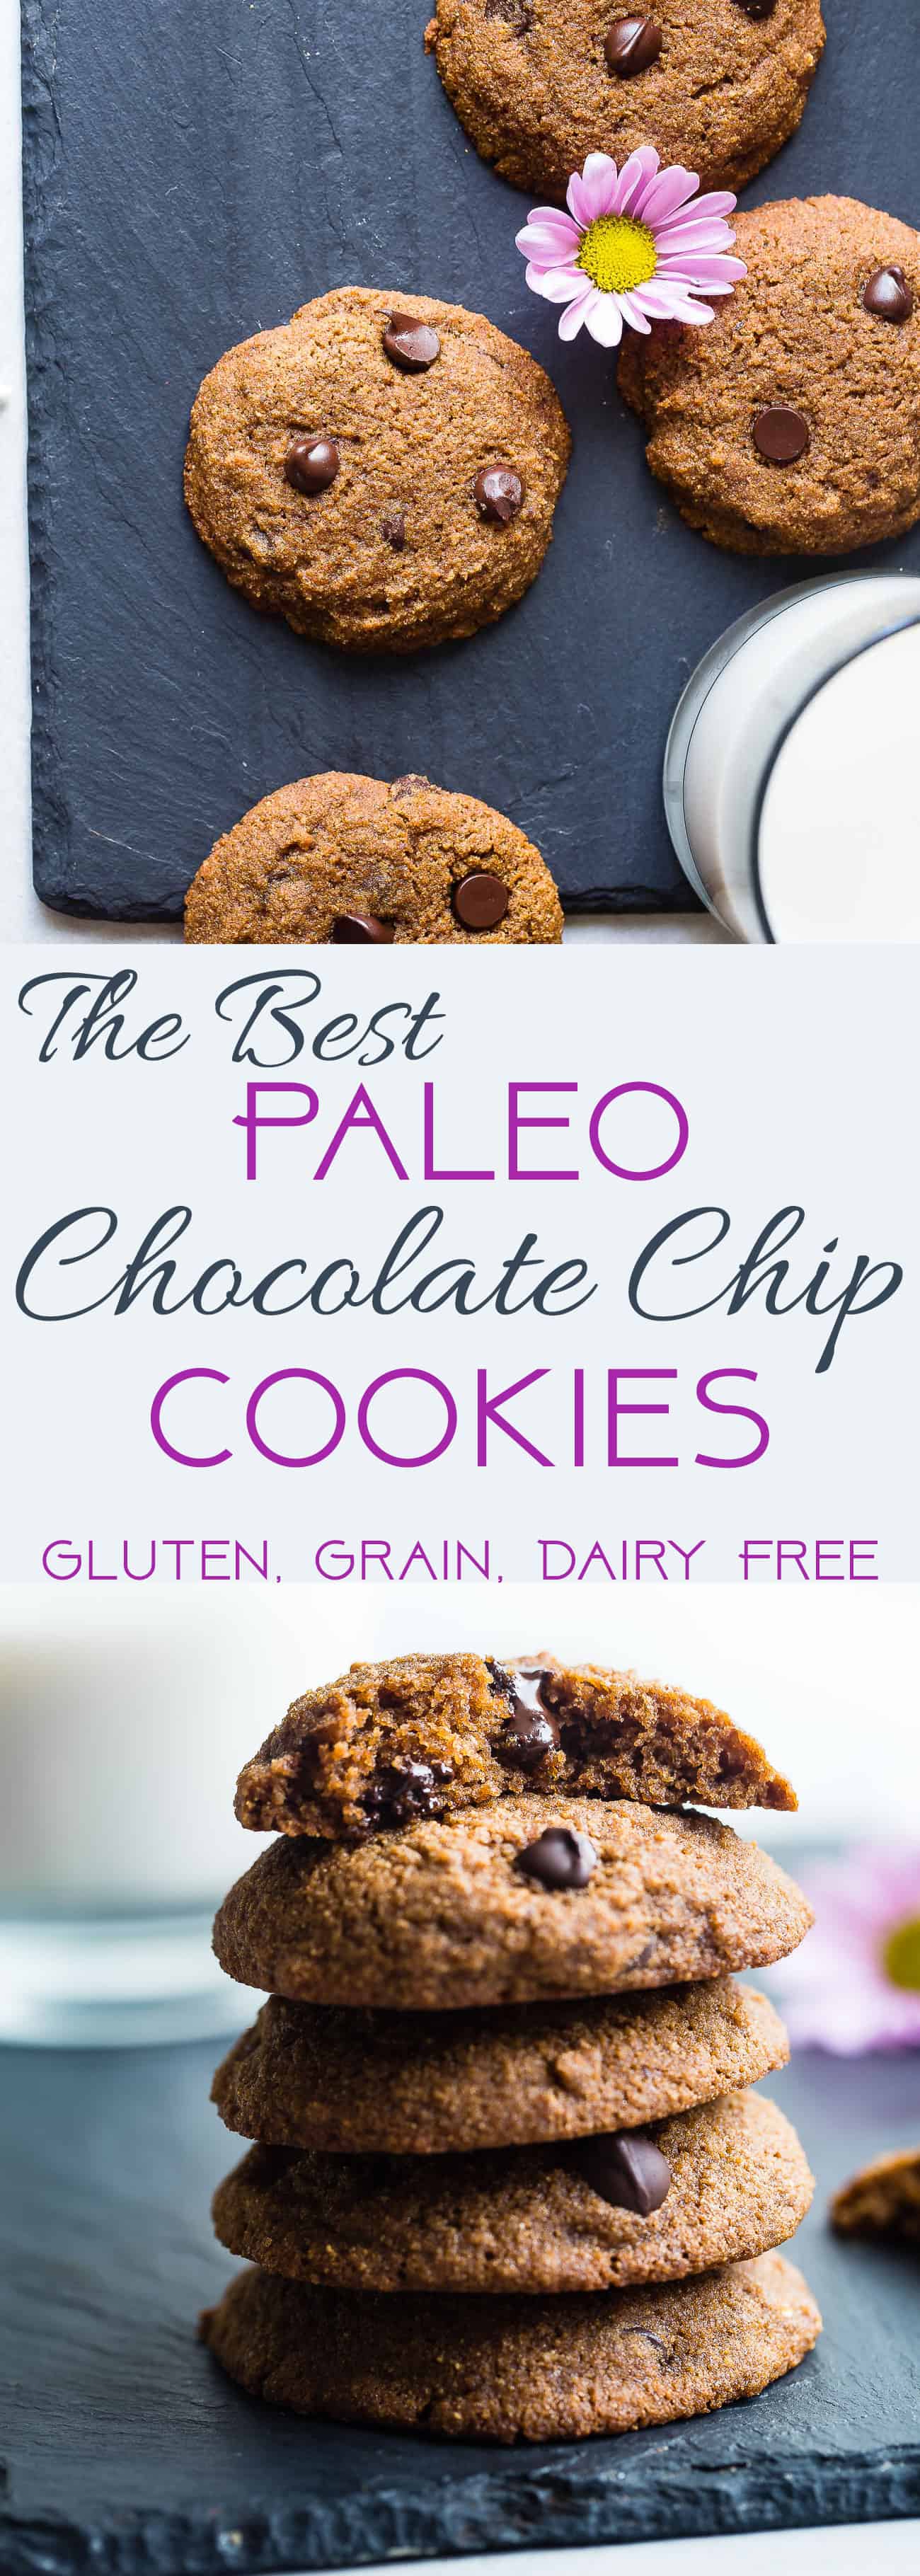 The Best Paleo Chocolate Chip Cookies - These EASY paleo friendly cookies are buttery, soft, chewy and SO rich and chocolaty! You won't believe they are gluten, grain and refined sugar free! | #Foodfaithfitness | #Paleo #Cookies #Glutenfree #ChocolateChip #GrainFree